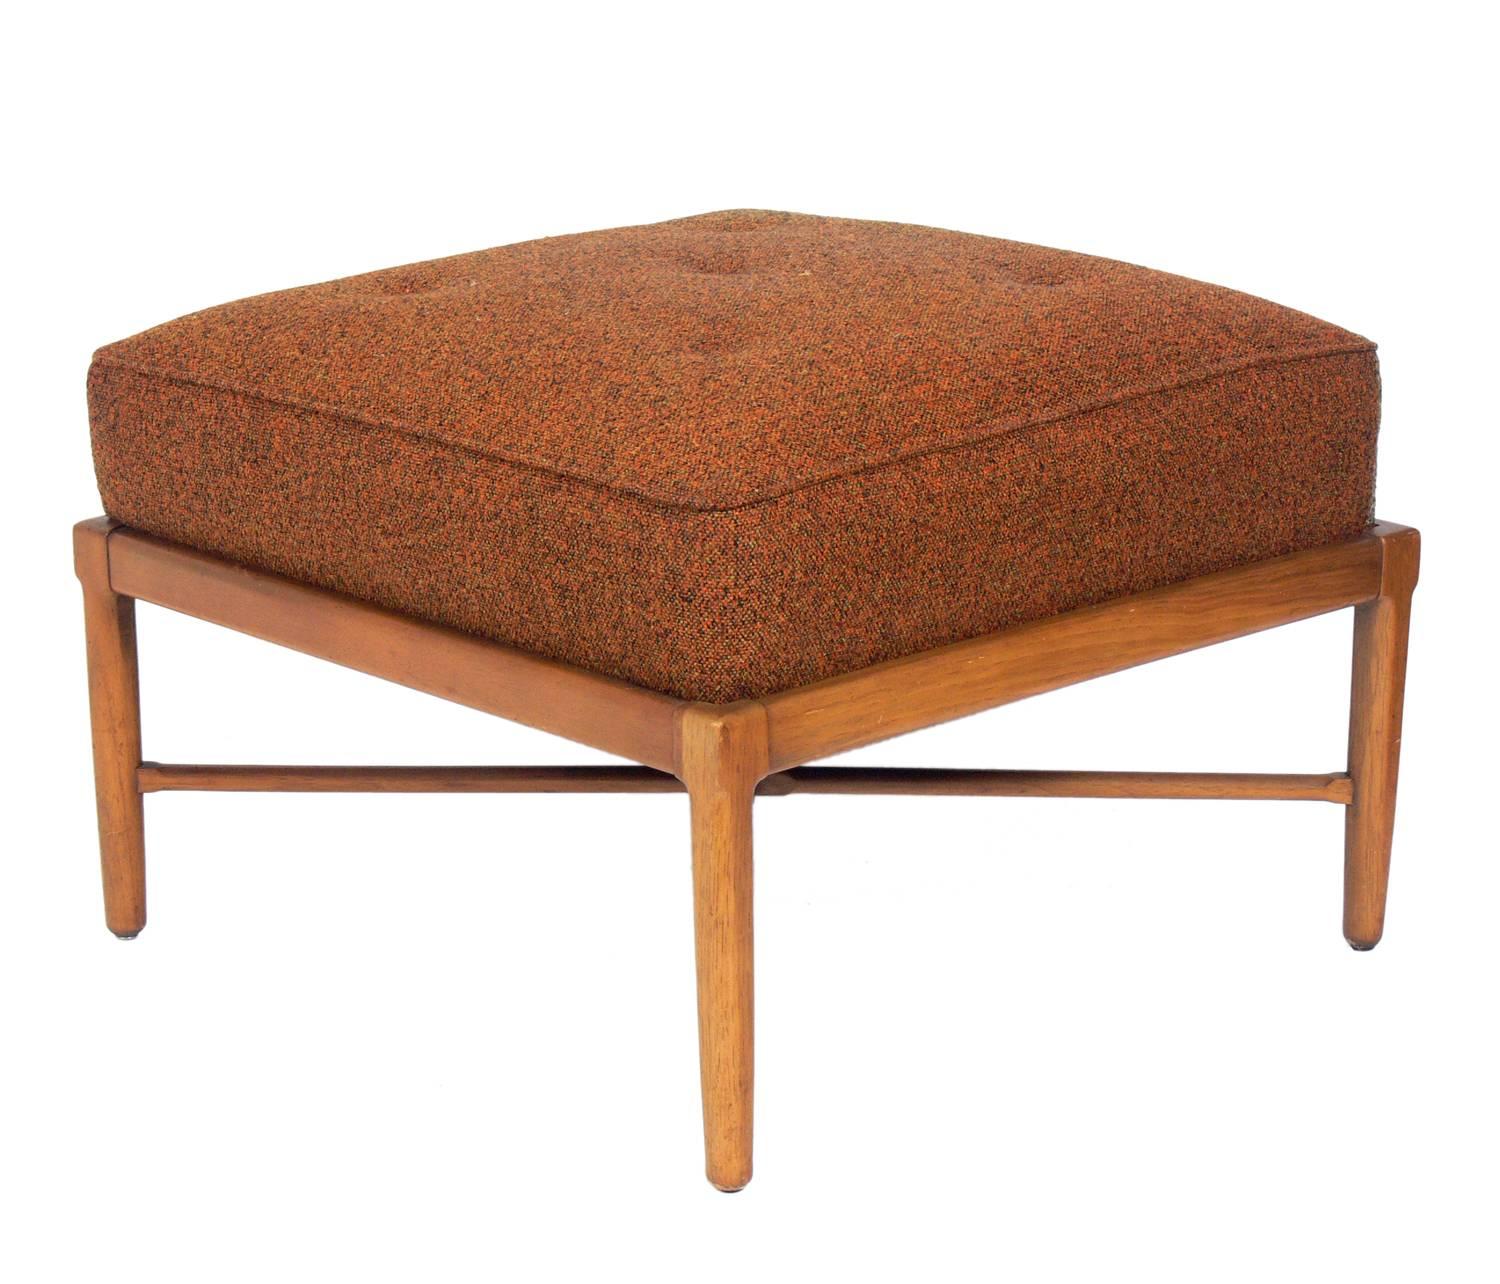 Large-scale modern X-based ottoman or stool, designed by John Lubberts and Lambert Mulder for Tomlinson, American, circa 1950s. Designed for Tomlinson's 